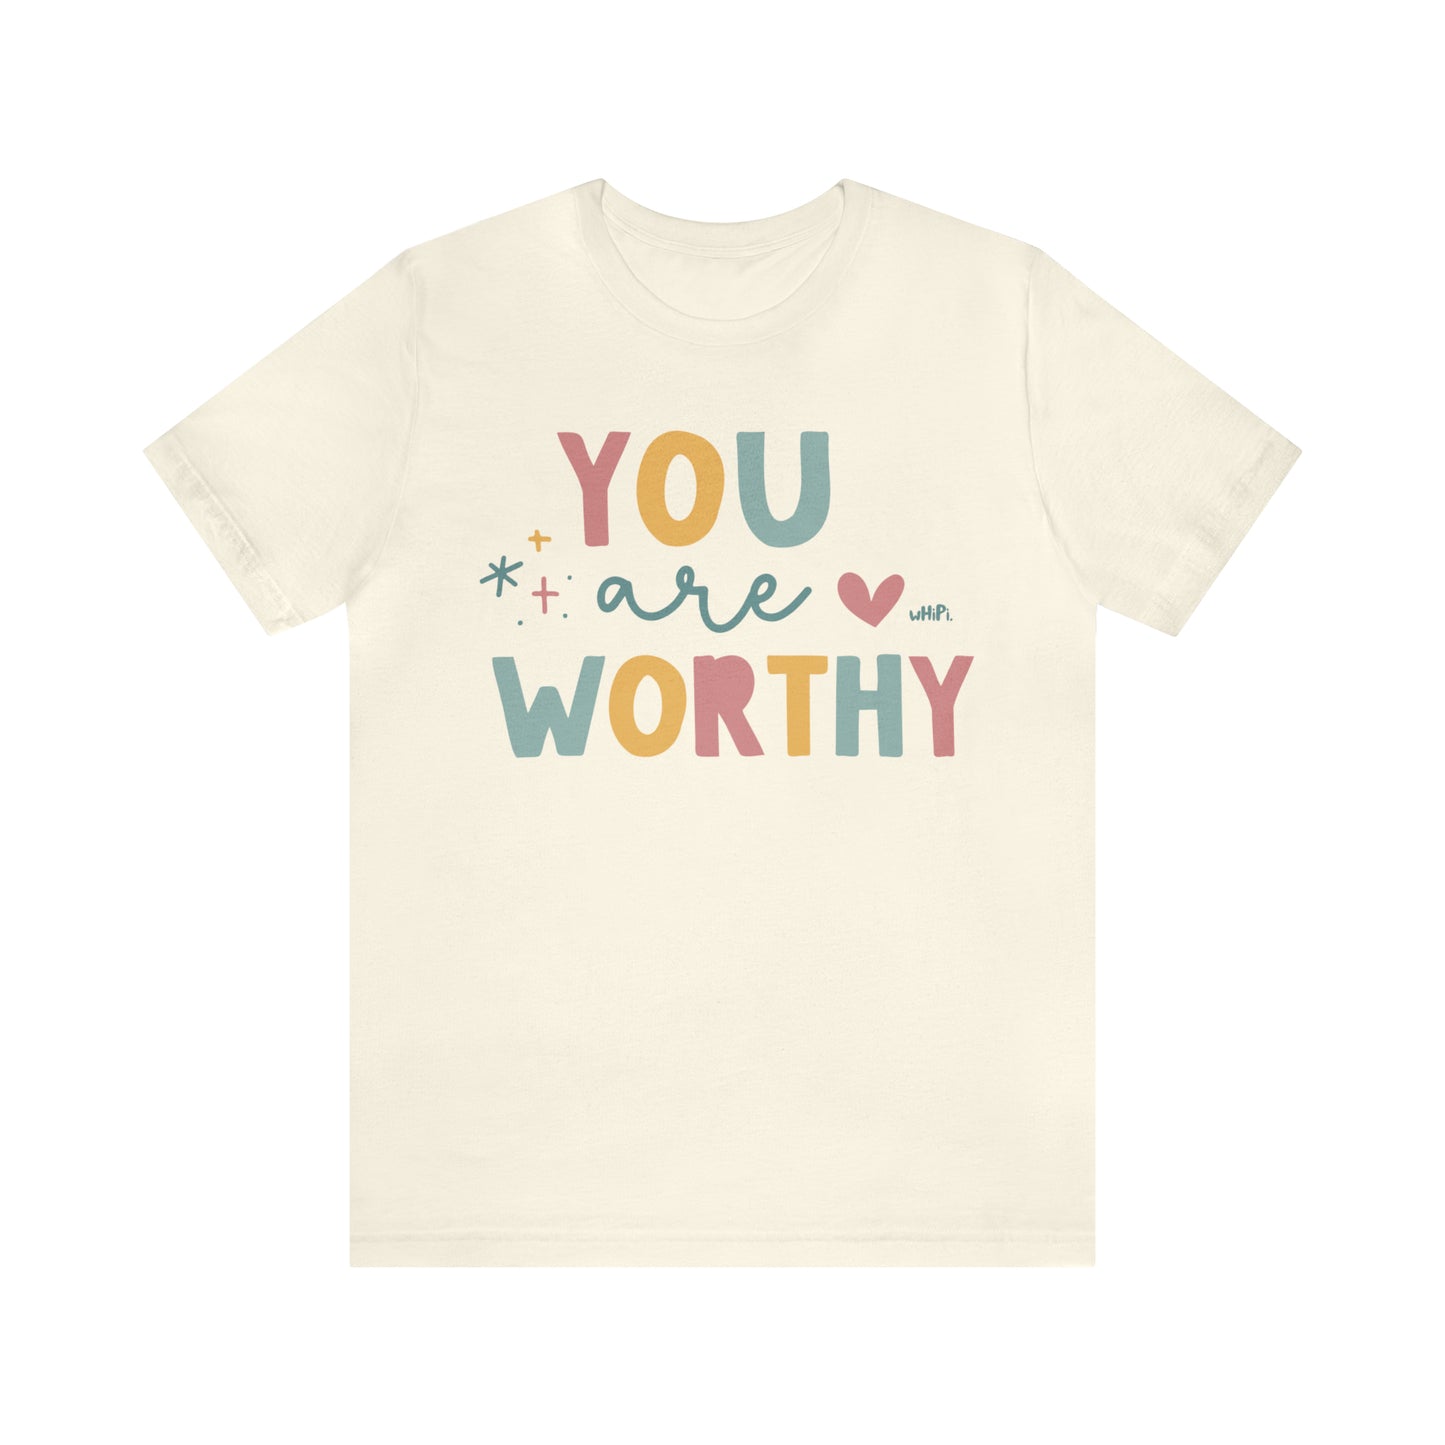 You Are Worthy